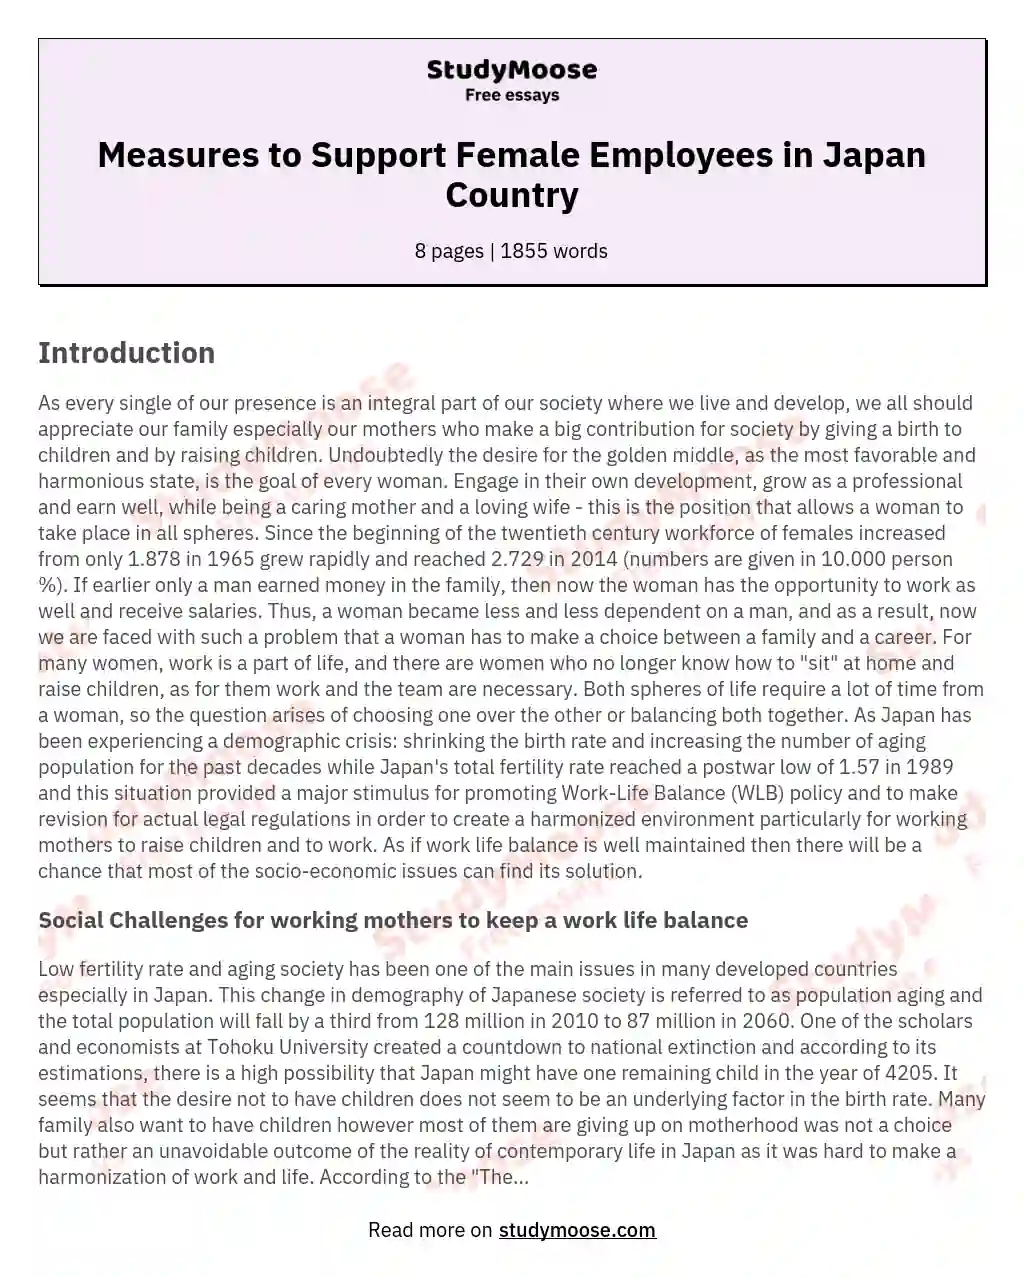 Measures to Support Female Employees in Japan Country